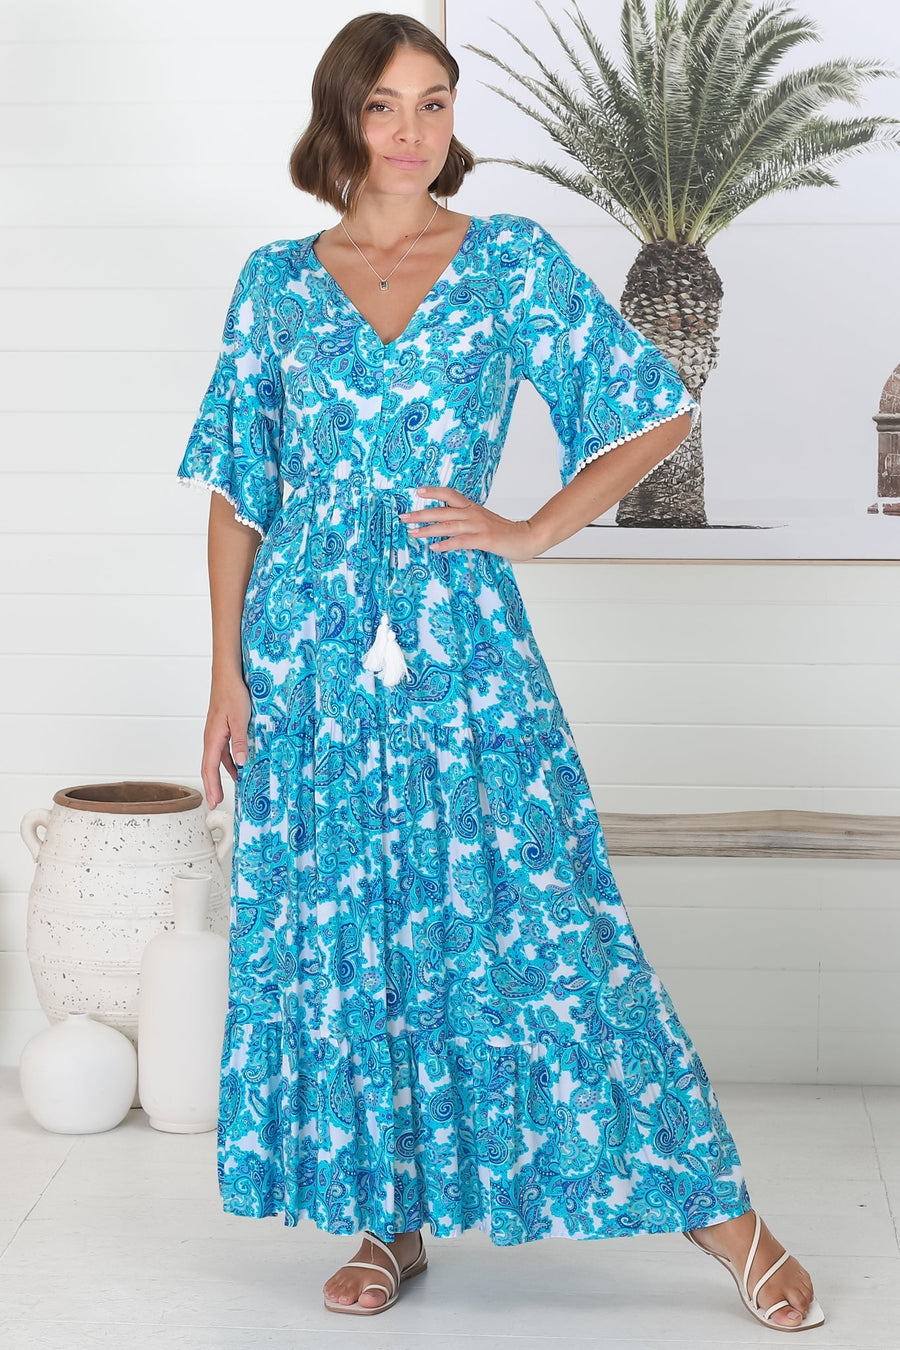 Shop the Romelly Maxi Dress in Blue at Salty Crush | Boho-Chic Dresses